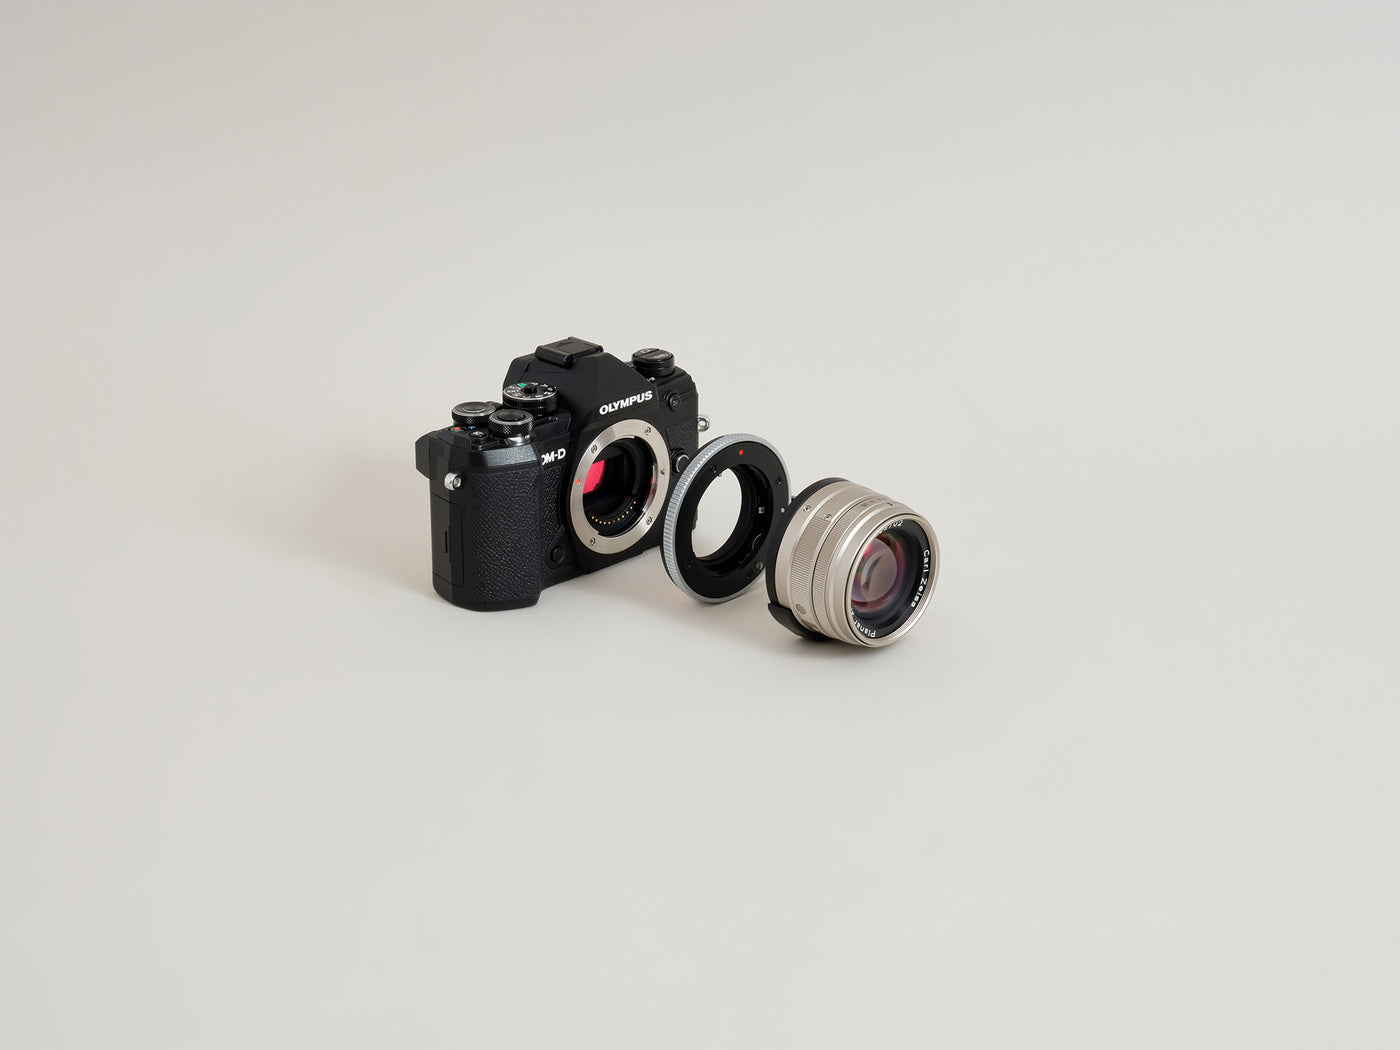 Contax G Lens Mount to Micro Four Thirds (M4/3) Camera Mount